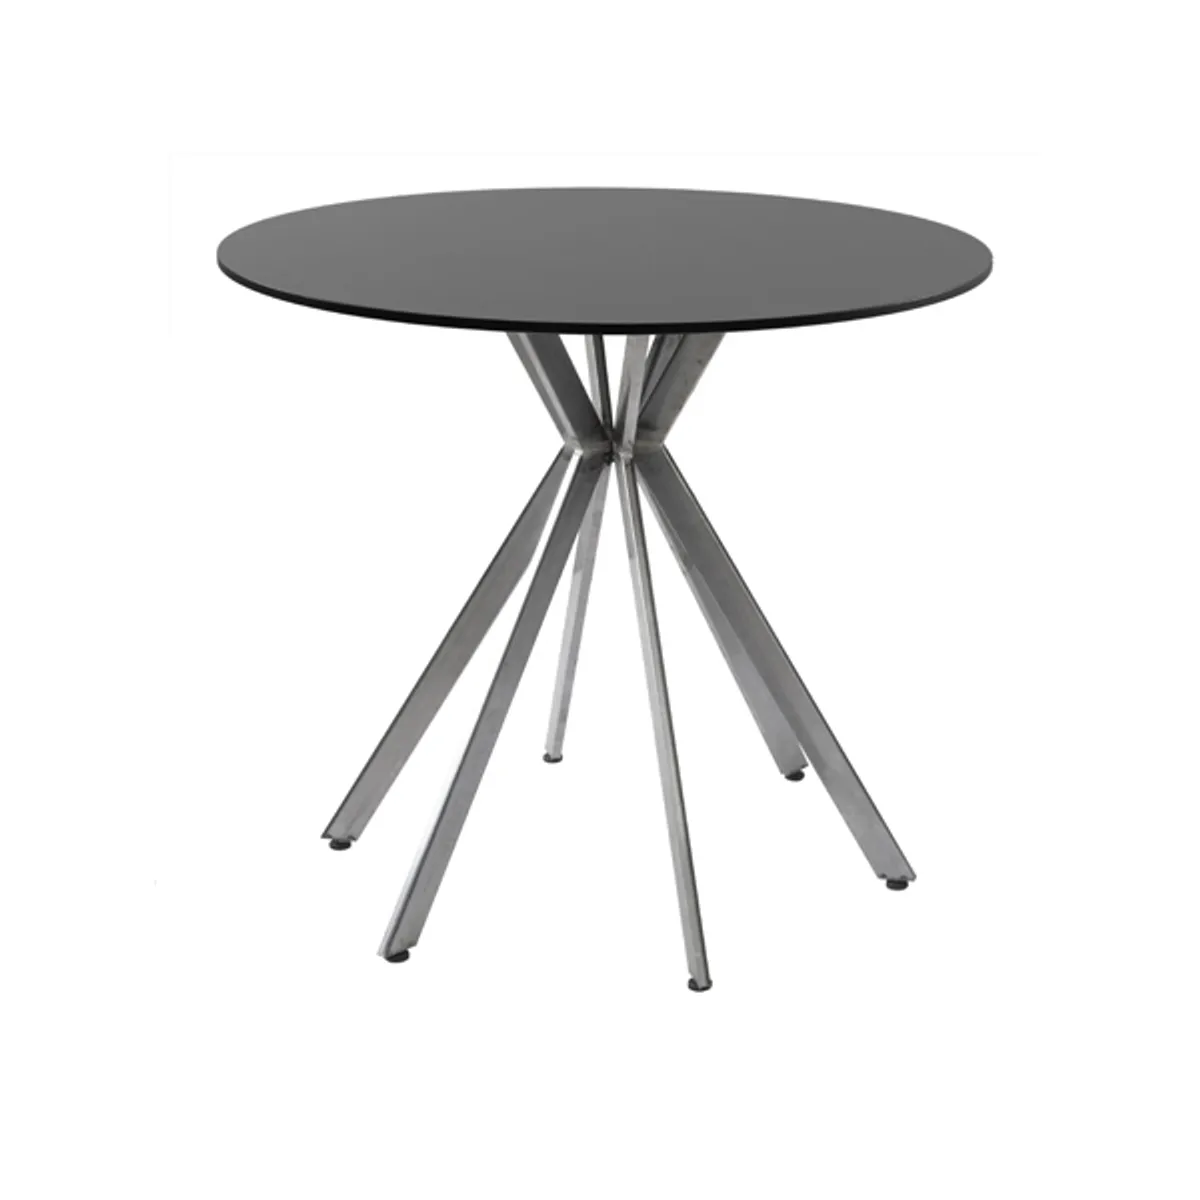 Perrine table Inside Out Contracts6